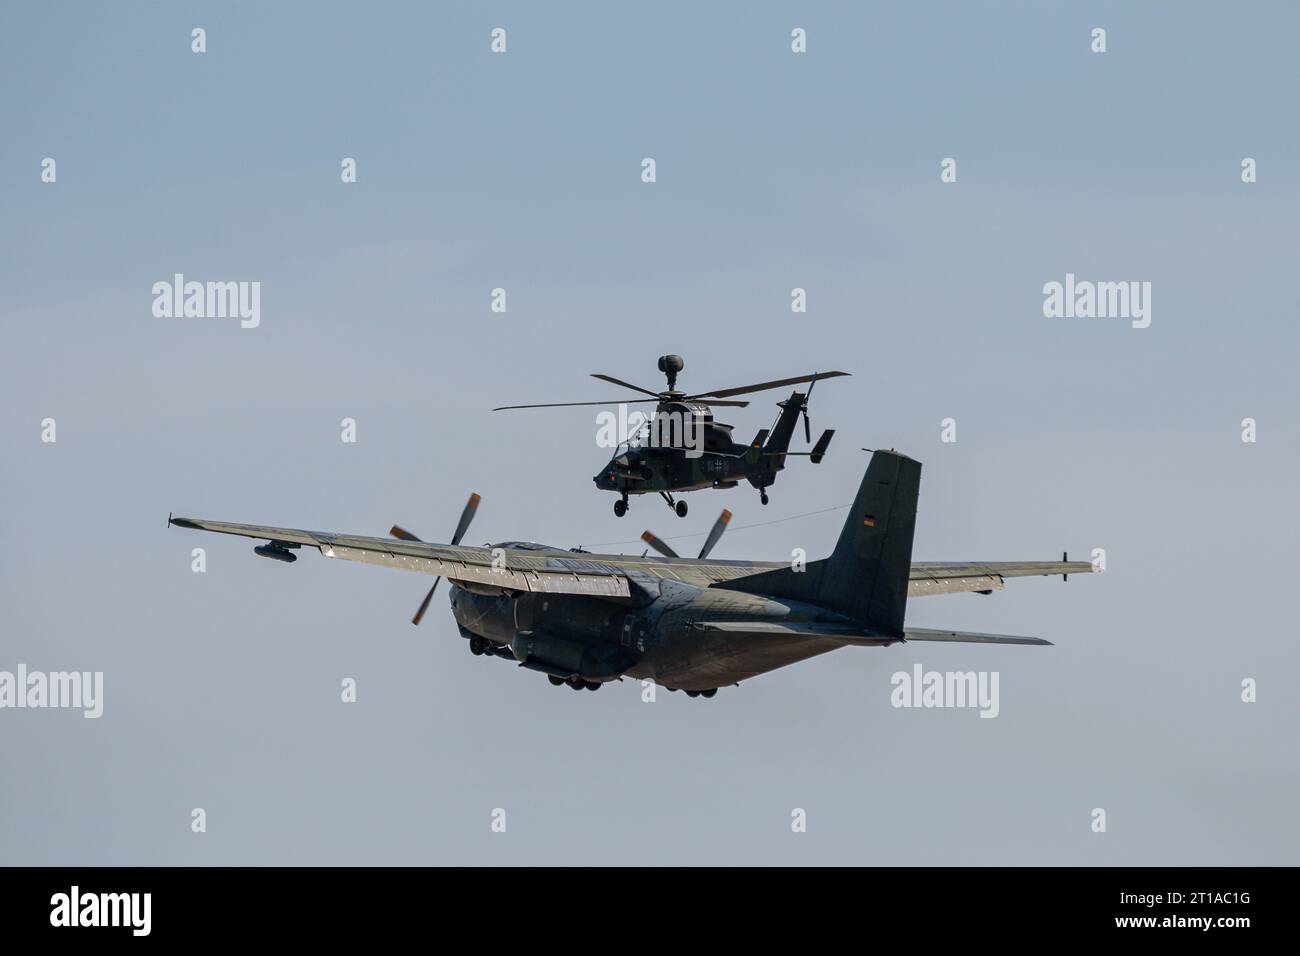 A Transall C-160 transport plane and a Eurocopter Tiger attack helicopter of the Bundeswehr, Berlin, Germany Stock Photo